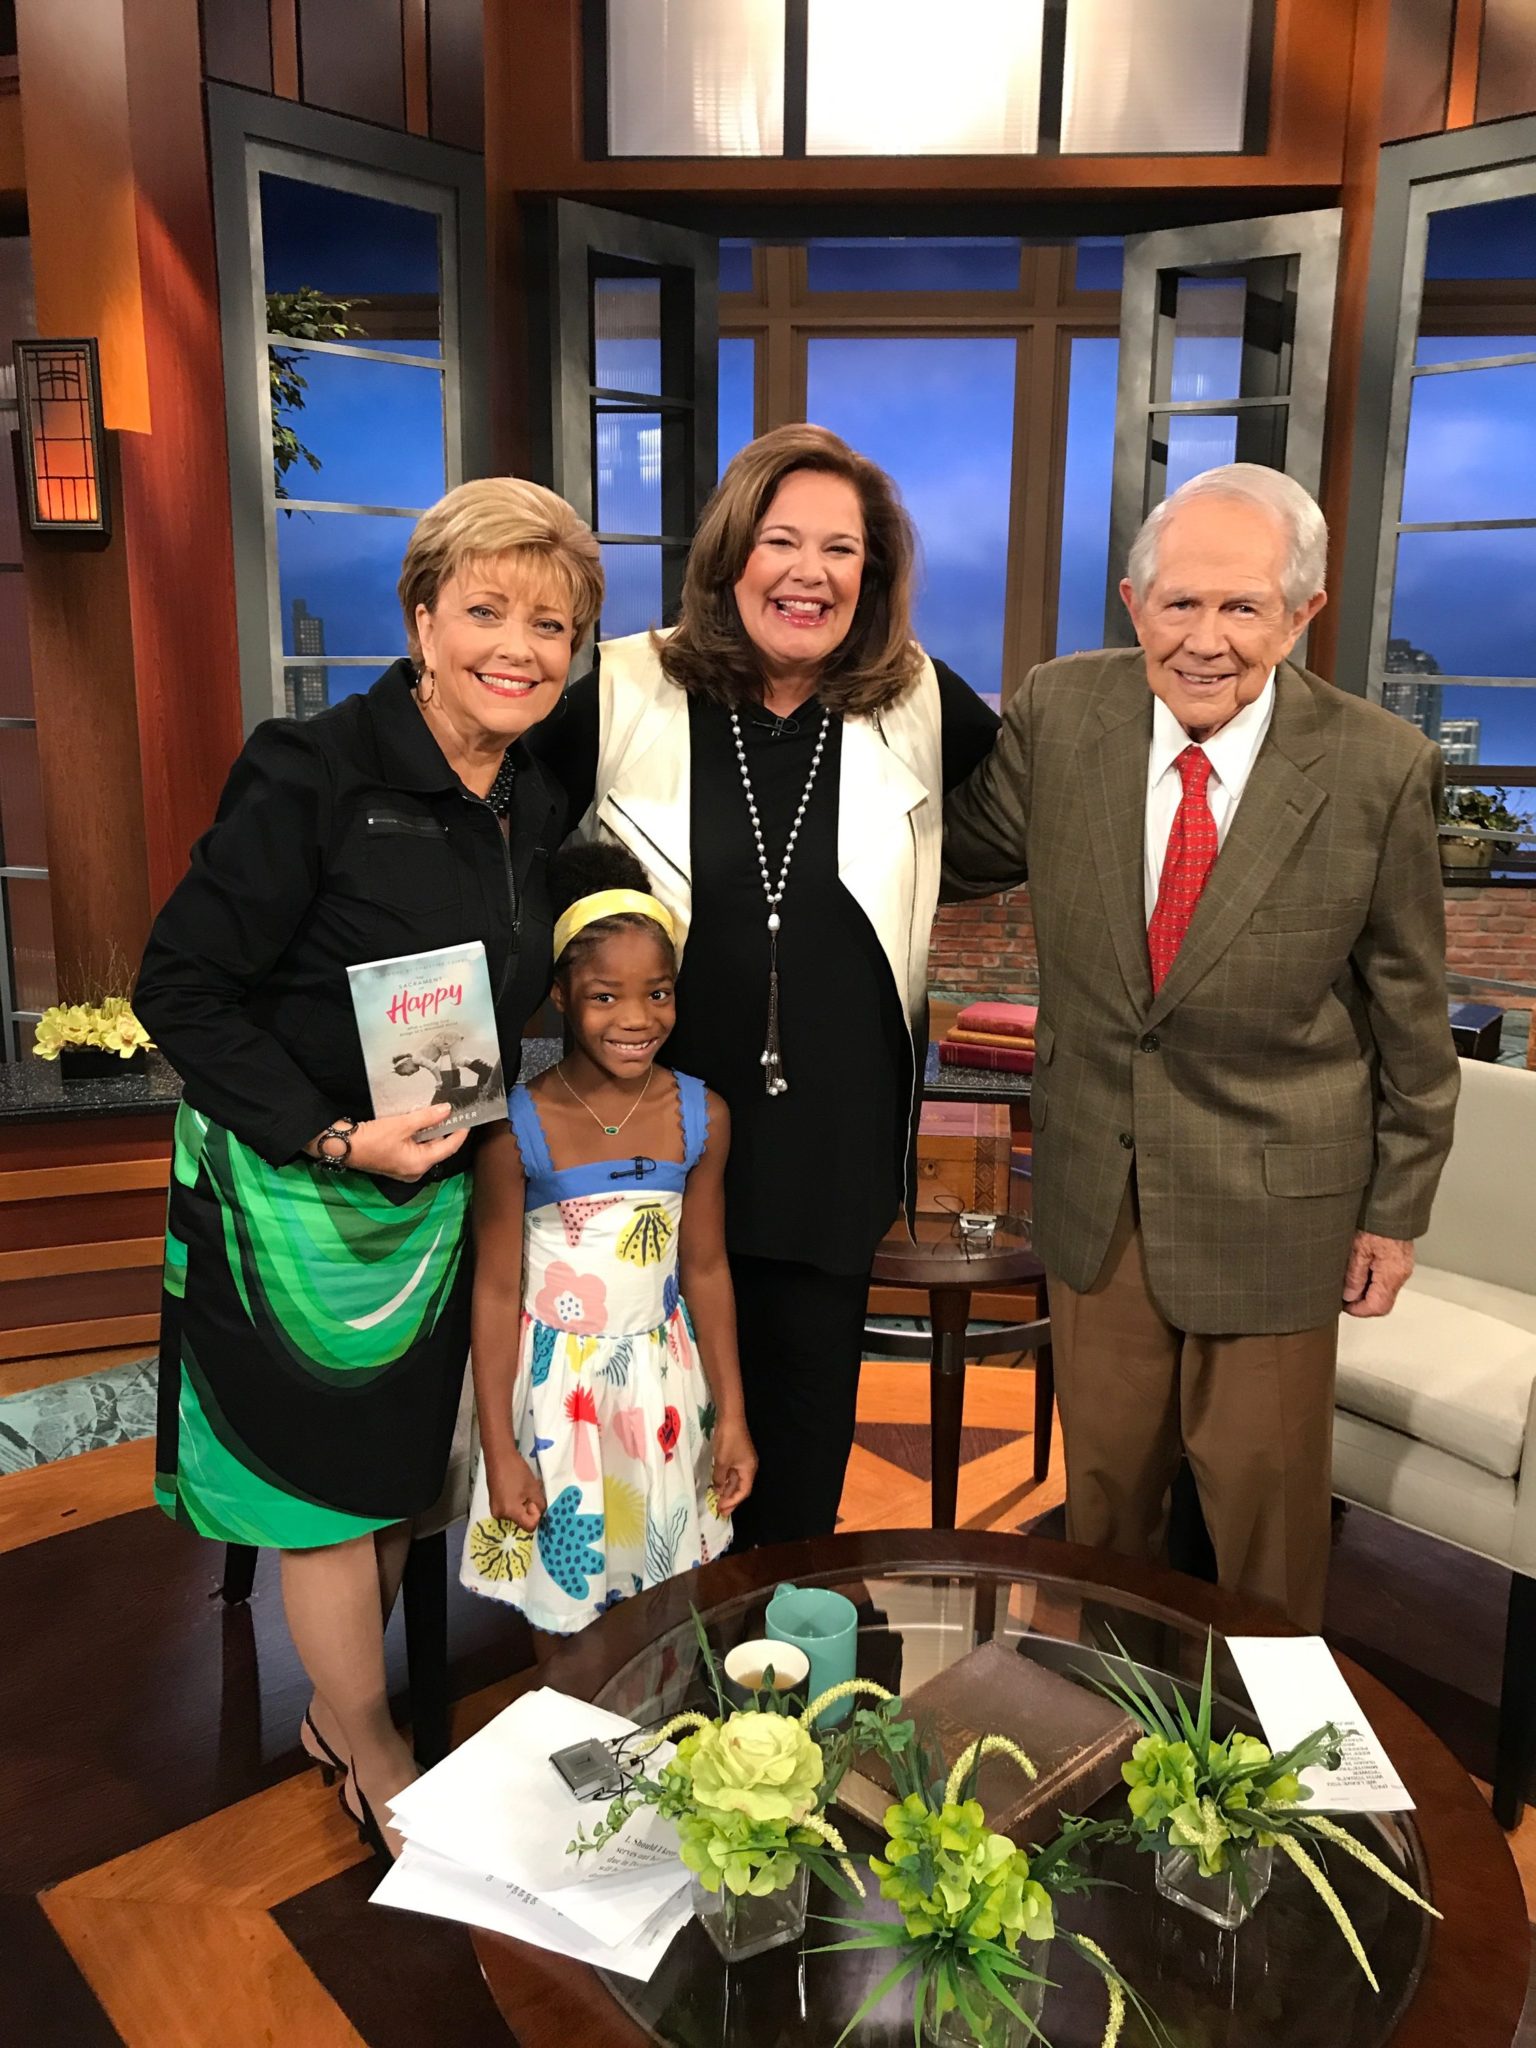 Lisa Harper and daughter Missy featured on The 700 Club - B&H Publishing